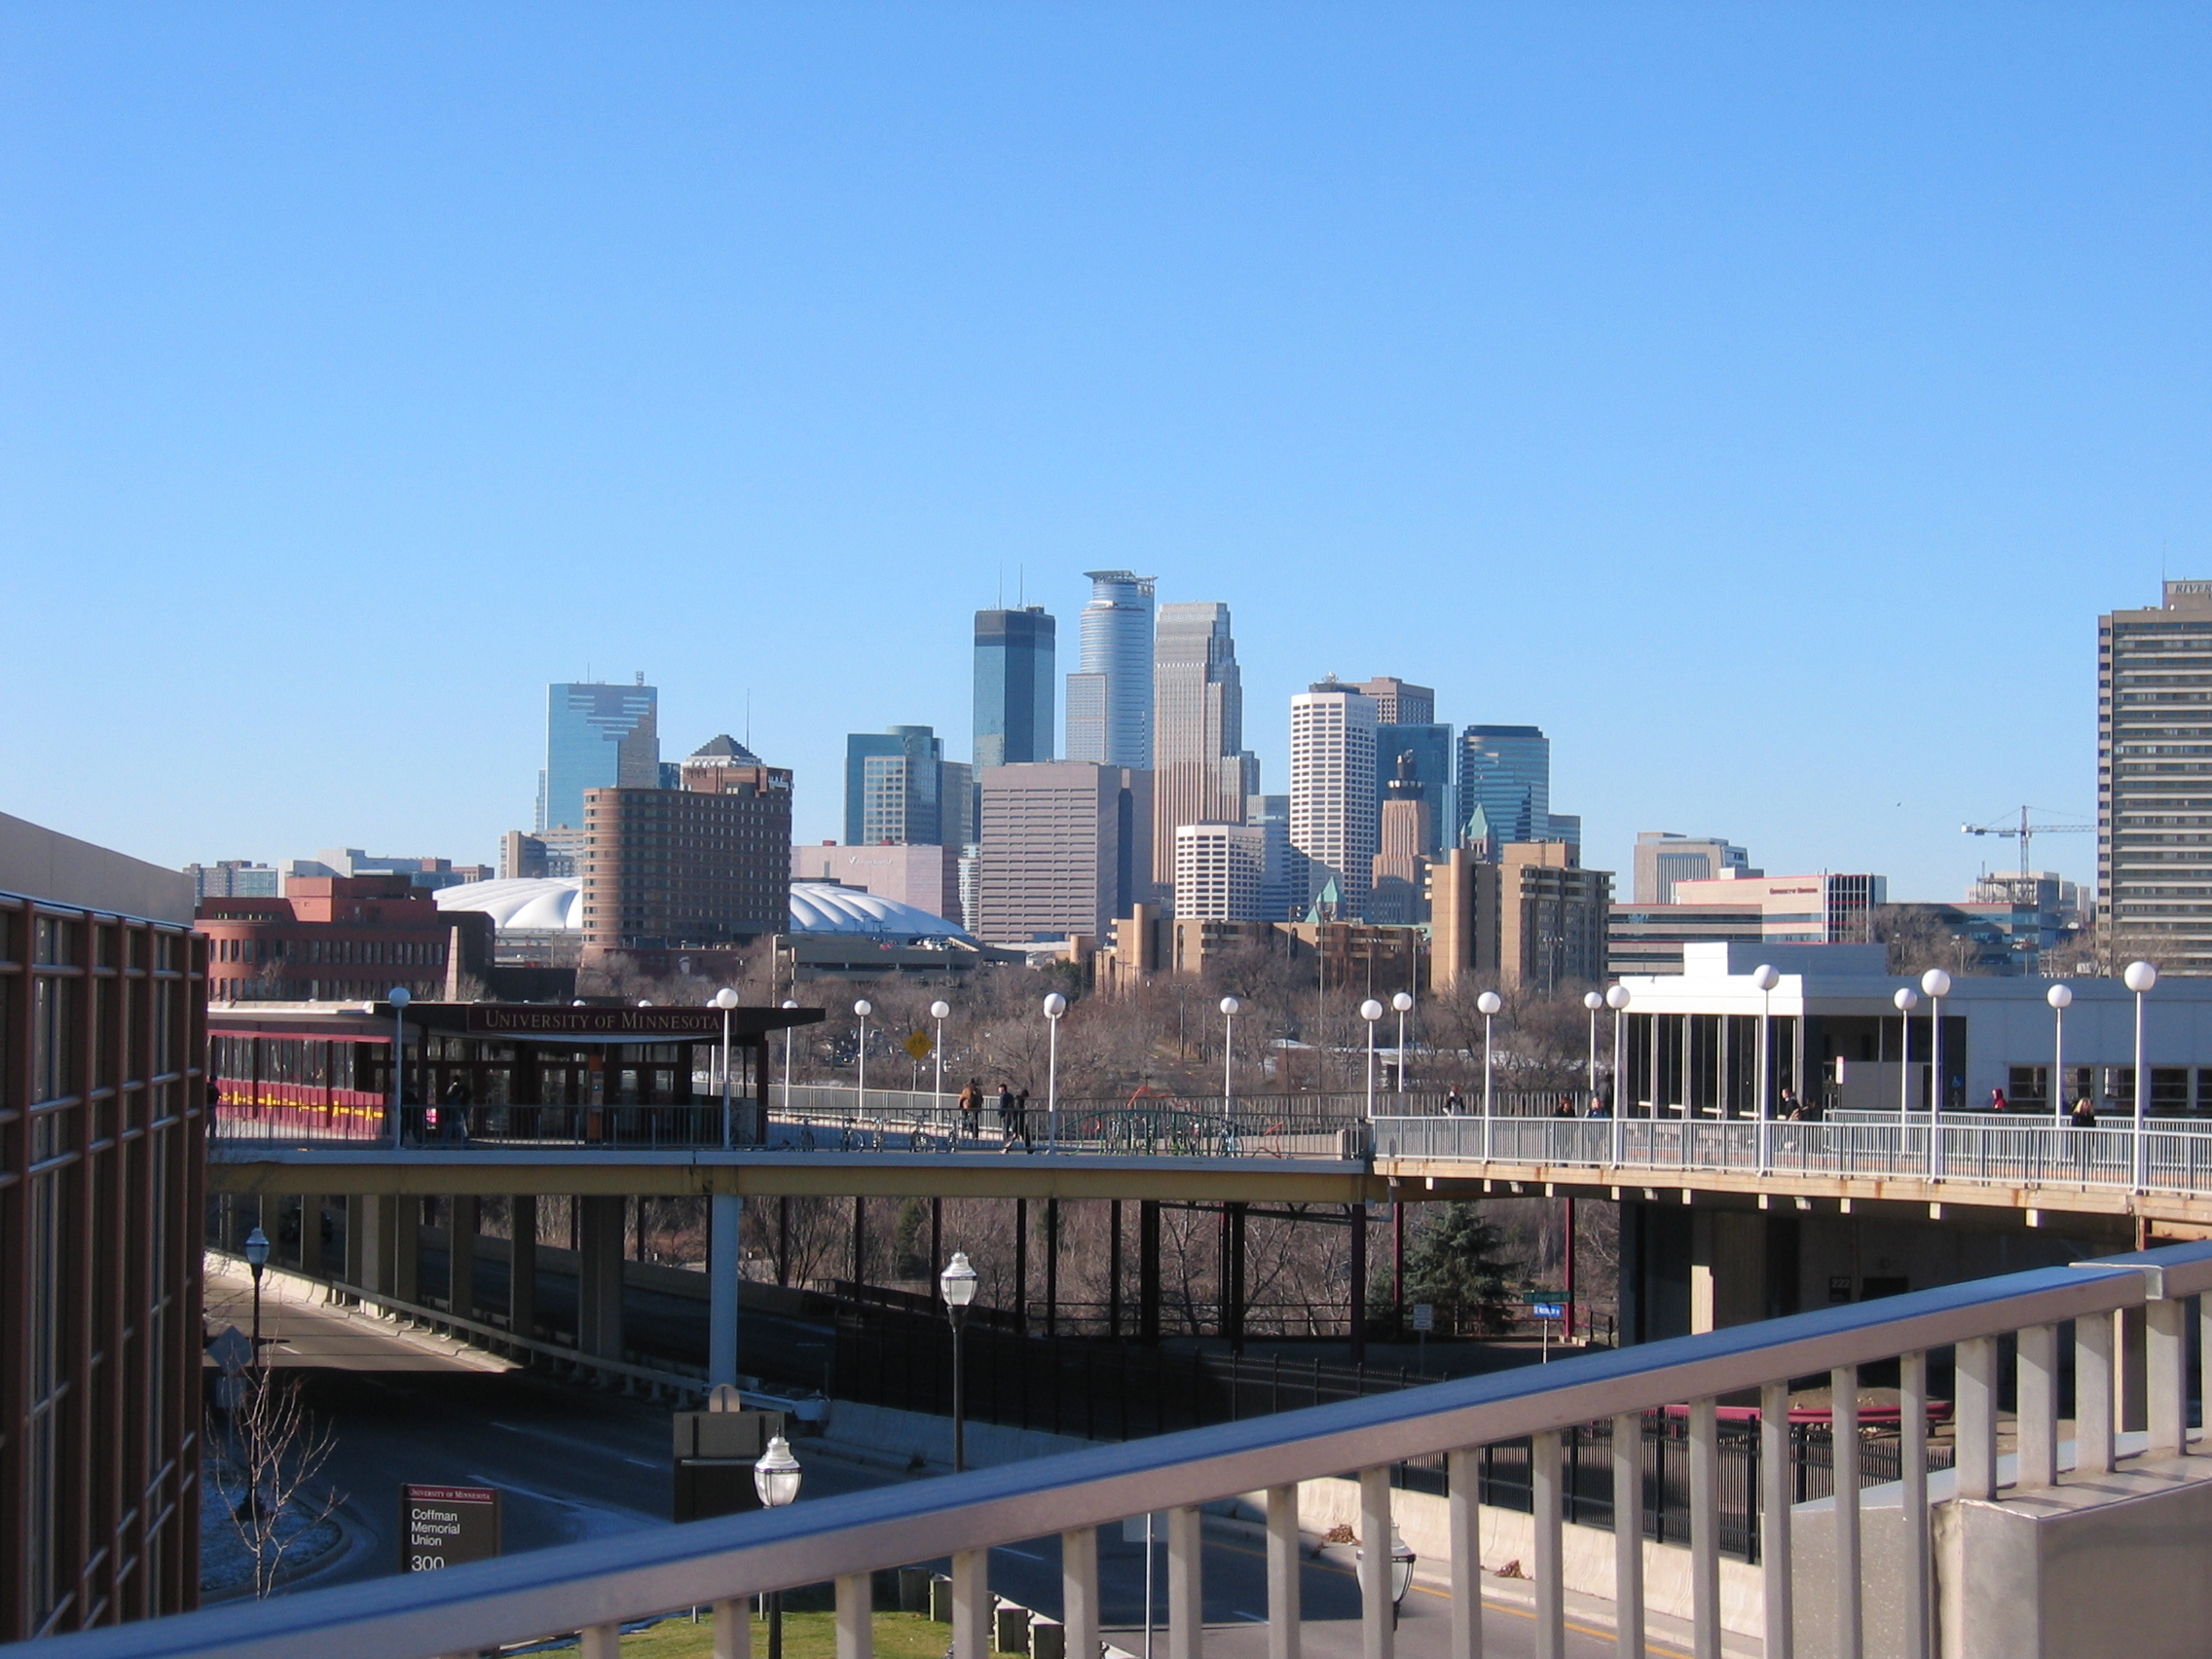 Nice view of downtown Minneapolis on the way to class